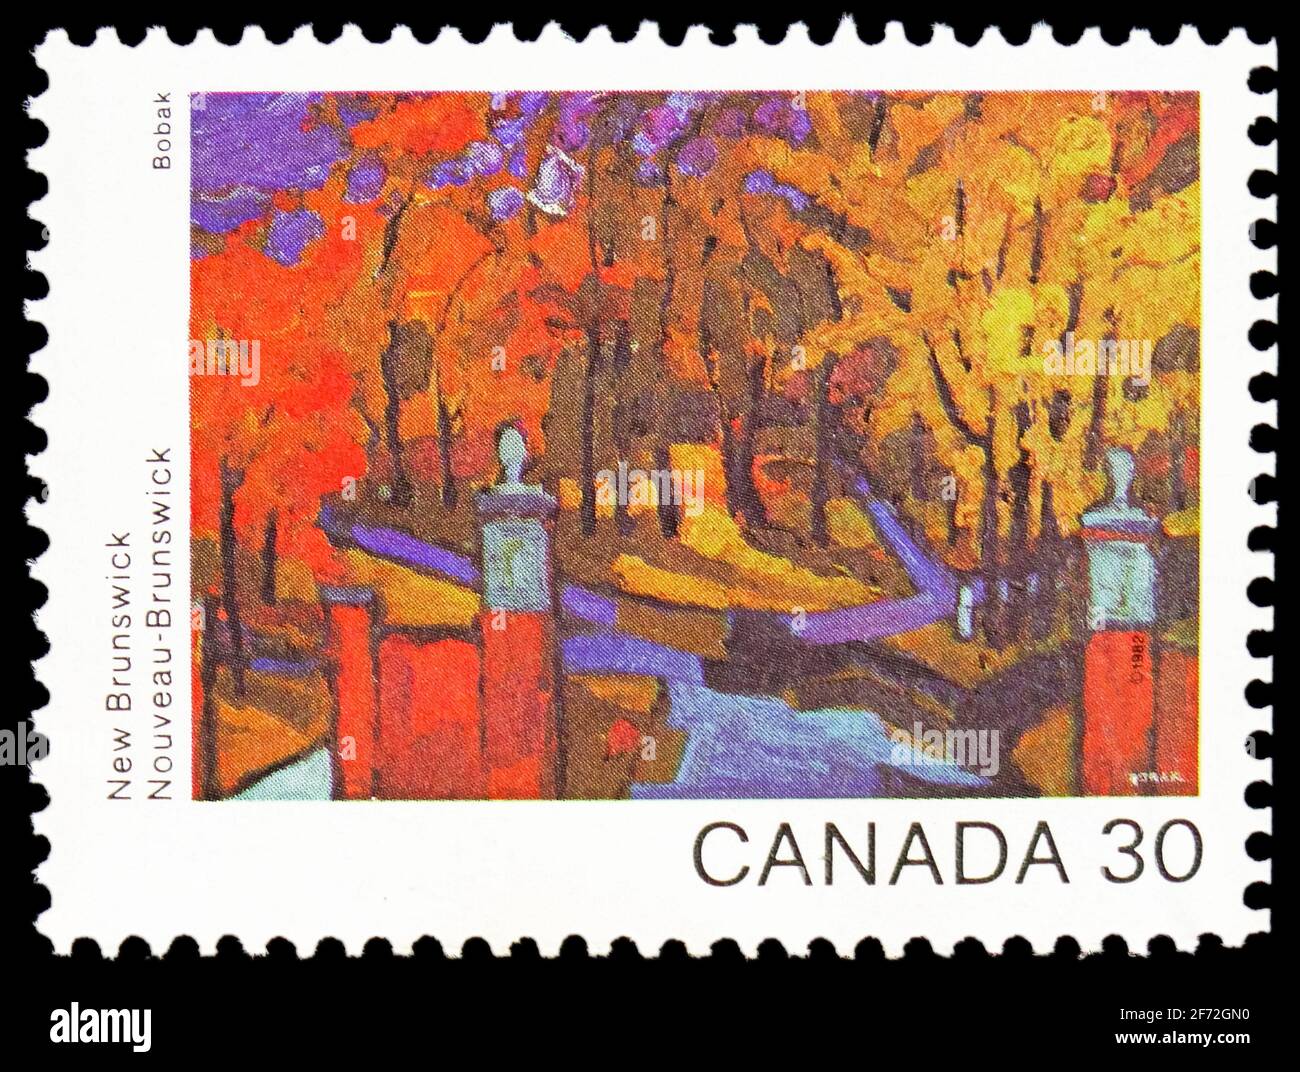 MOSCOW, RUSSIA - DECEMBER 22, 2020: Postage stamp printed in Canada shows New Brunswick, Campus Gates (Bobak), anada Day Paintings of Canadian Landsca Stock Photo